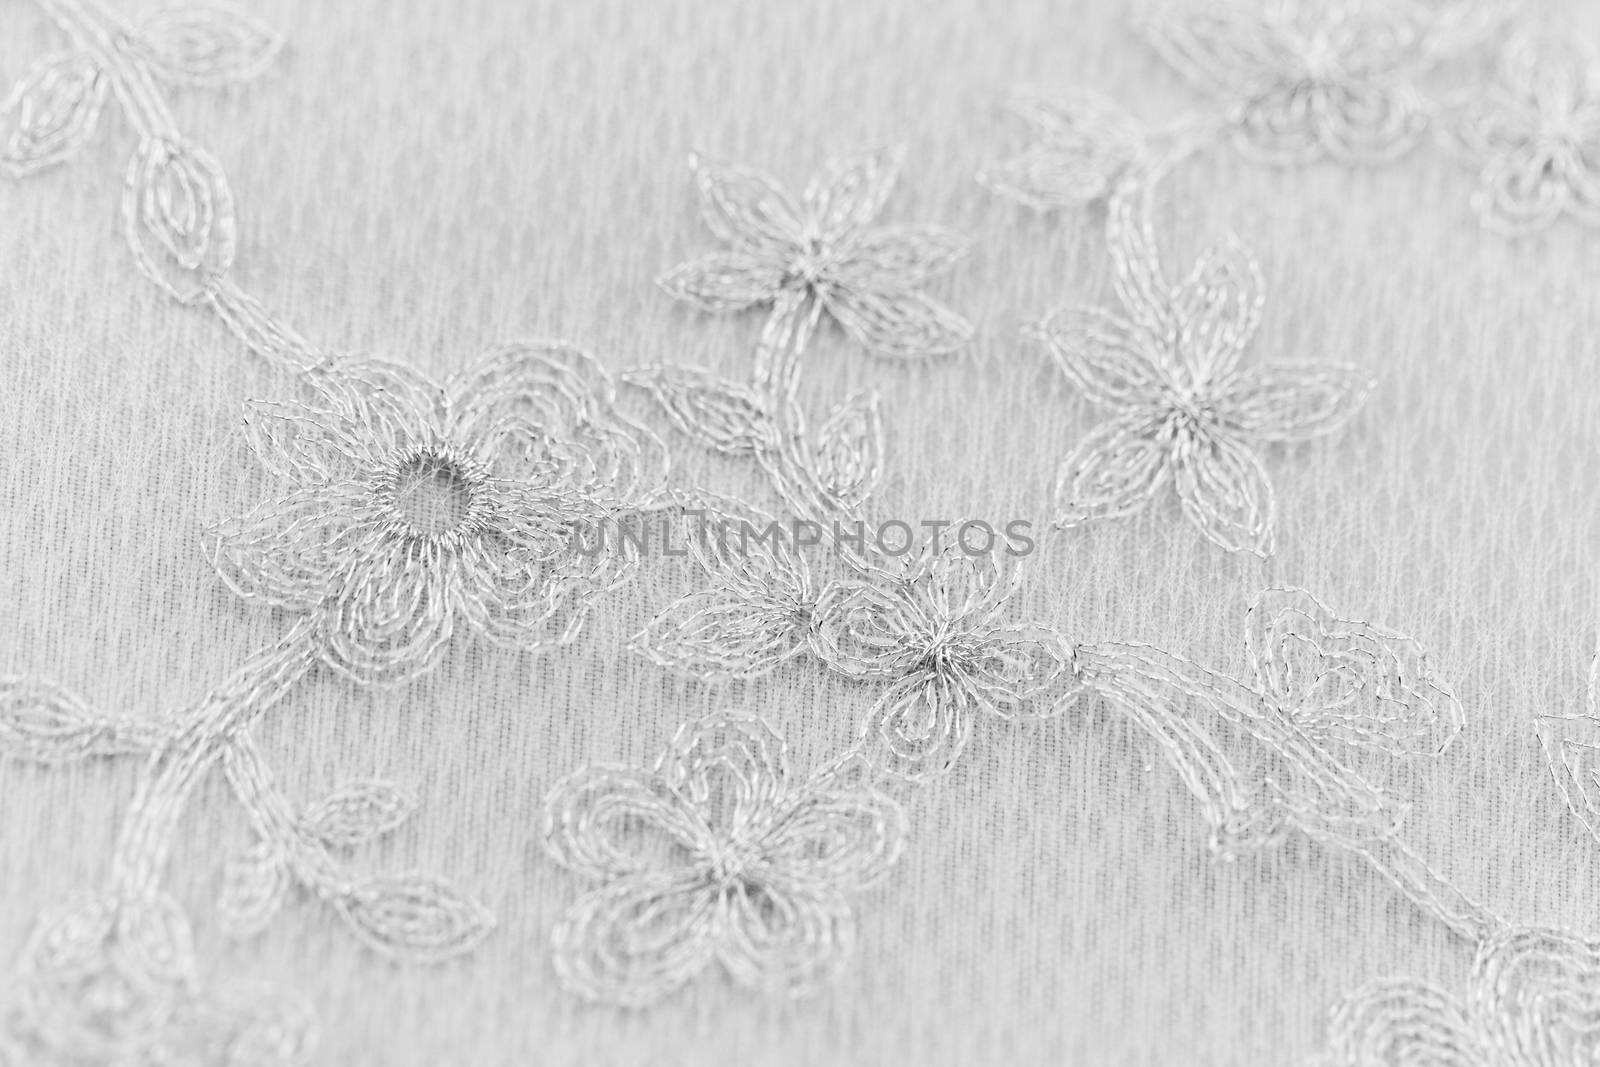 Beautiful lace by Nneirda